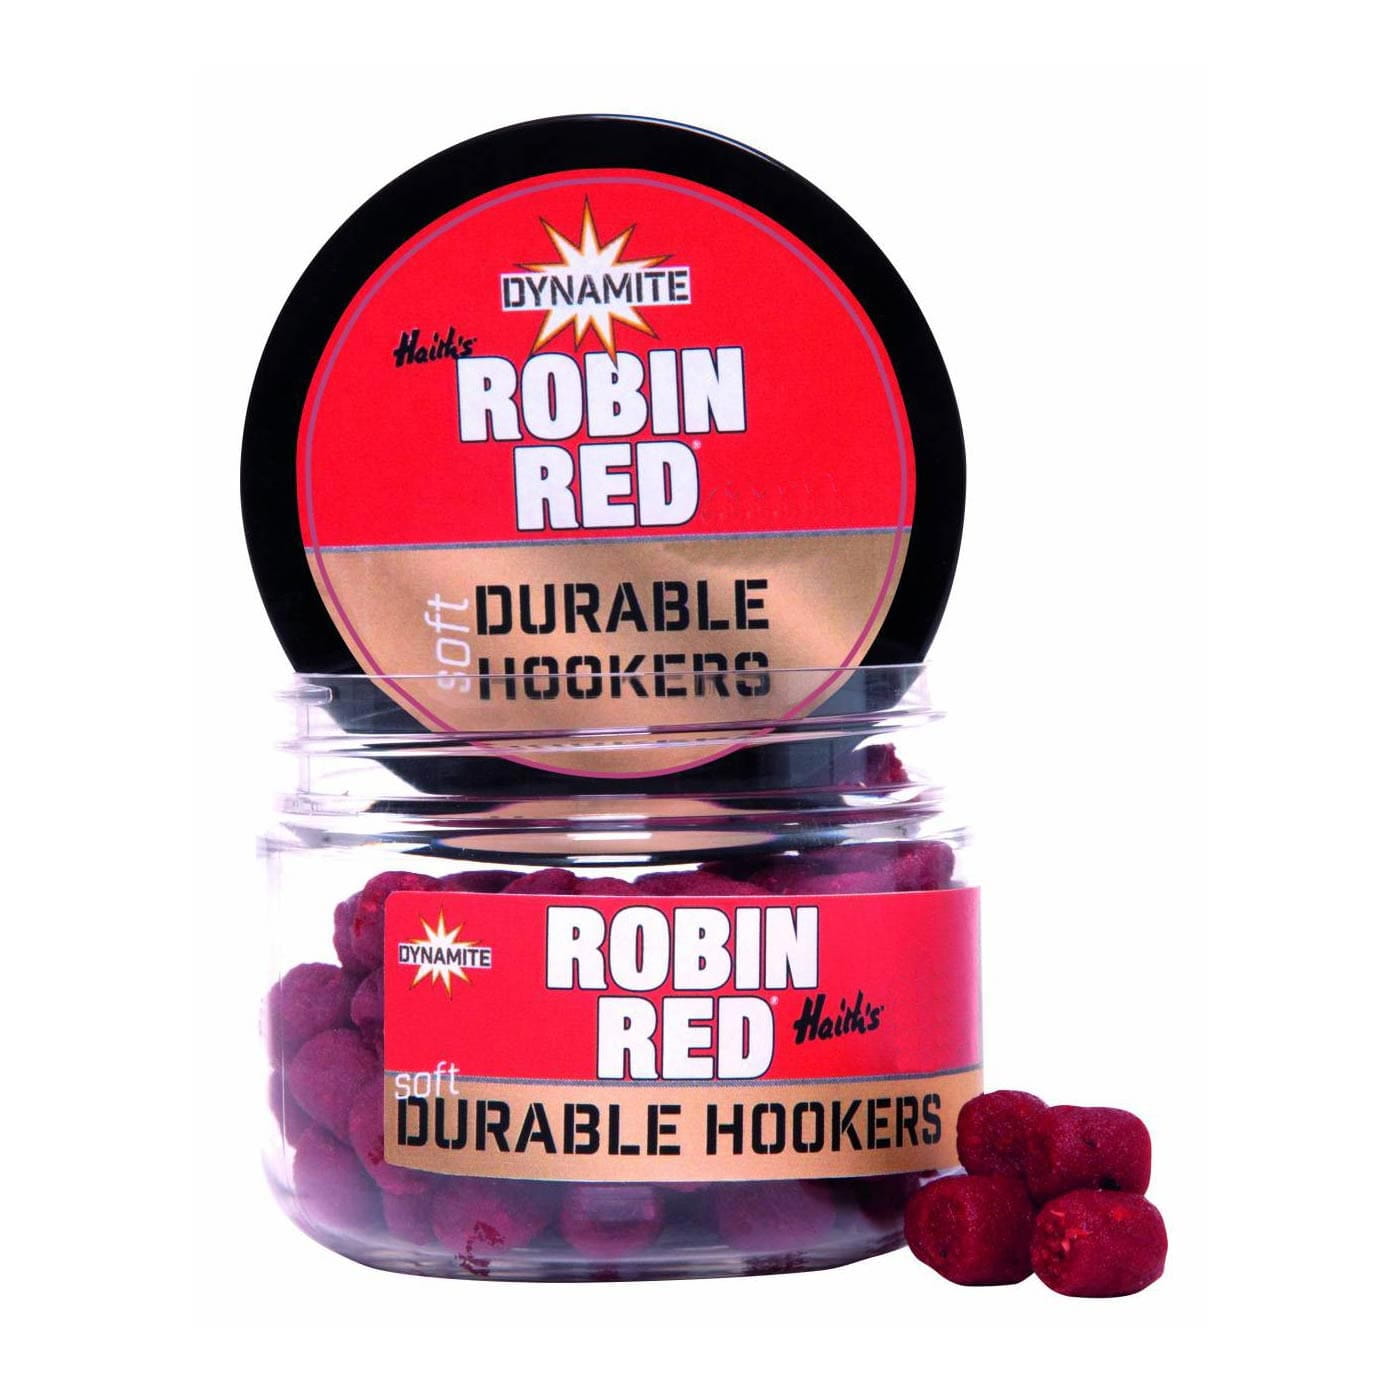 Dynamite Baits Robin Red Soft Durable Hookers 12mm